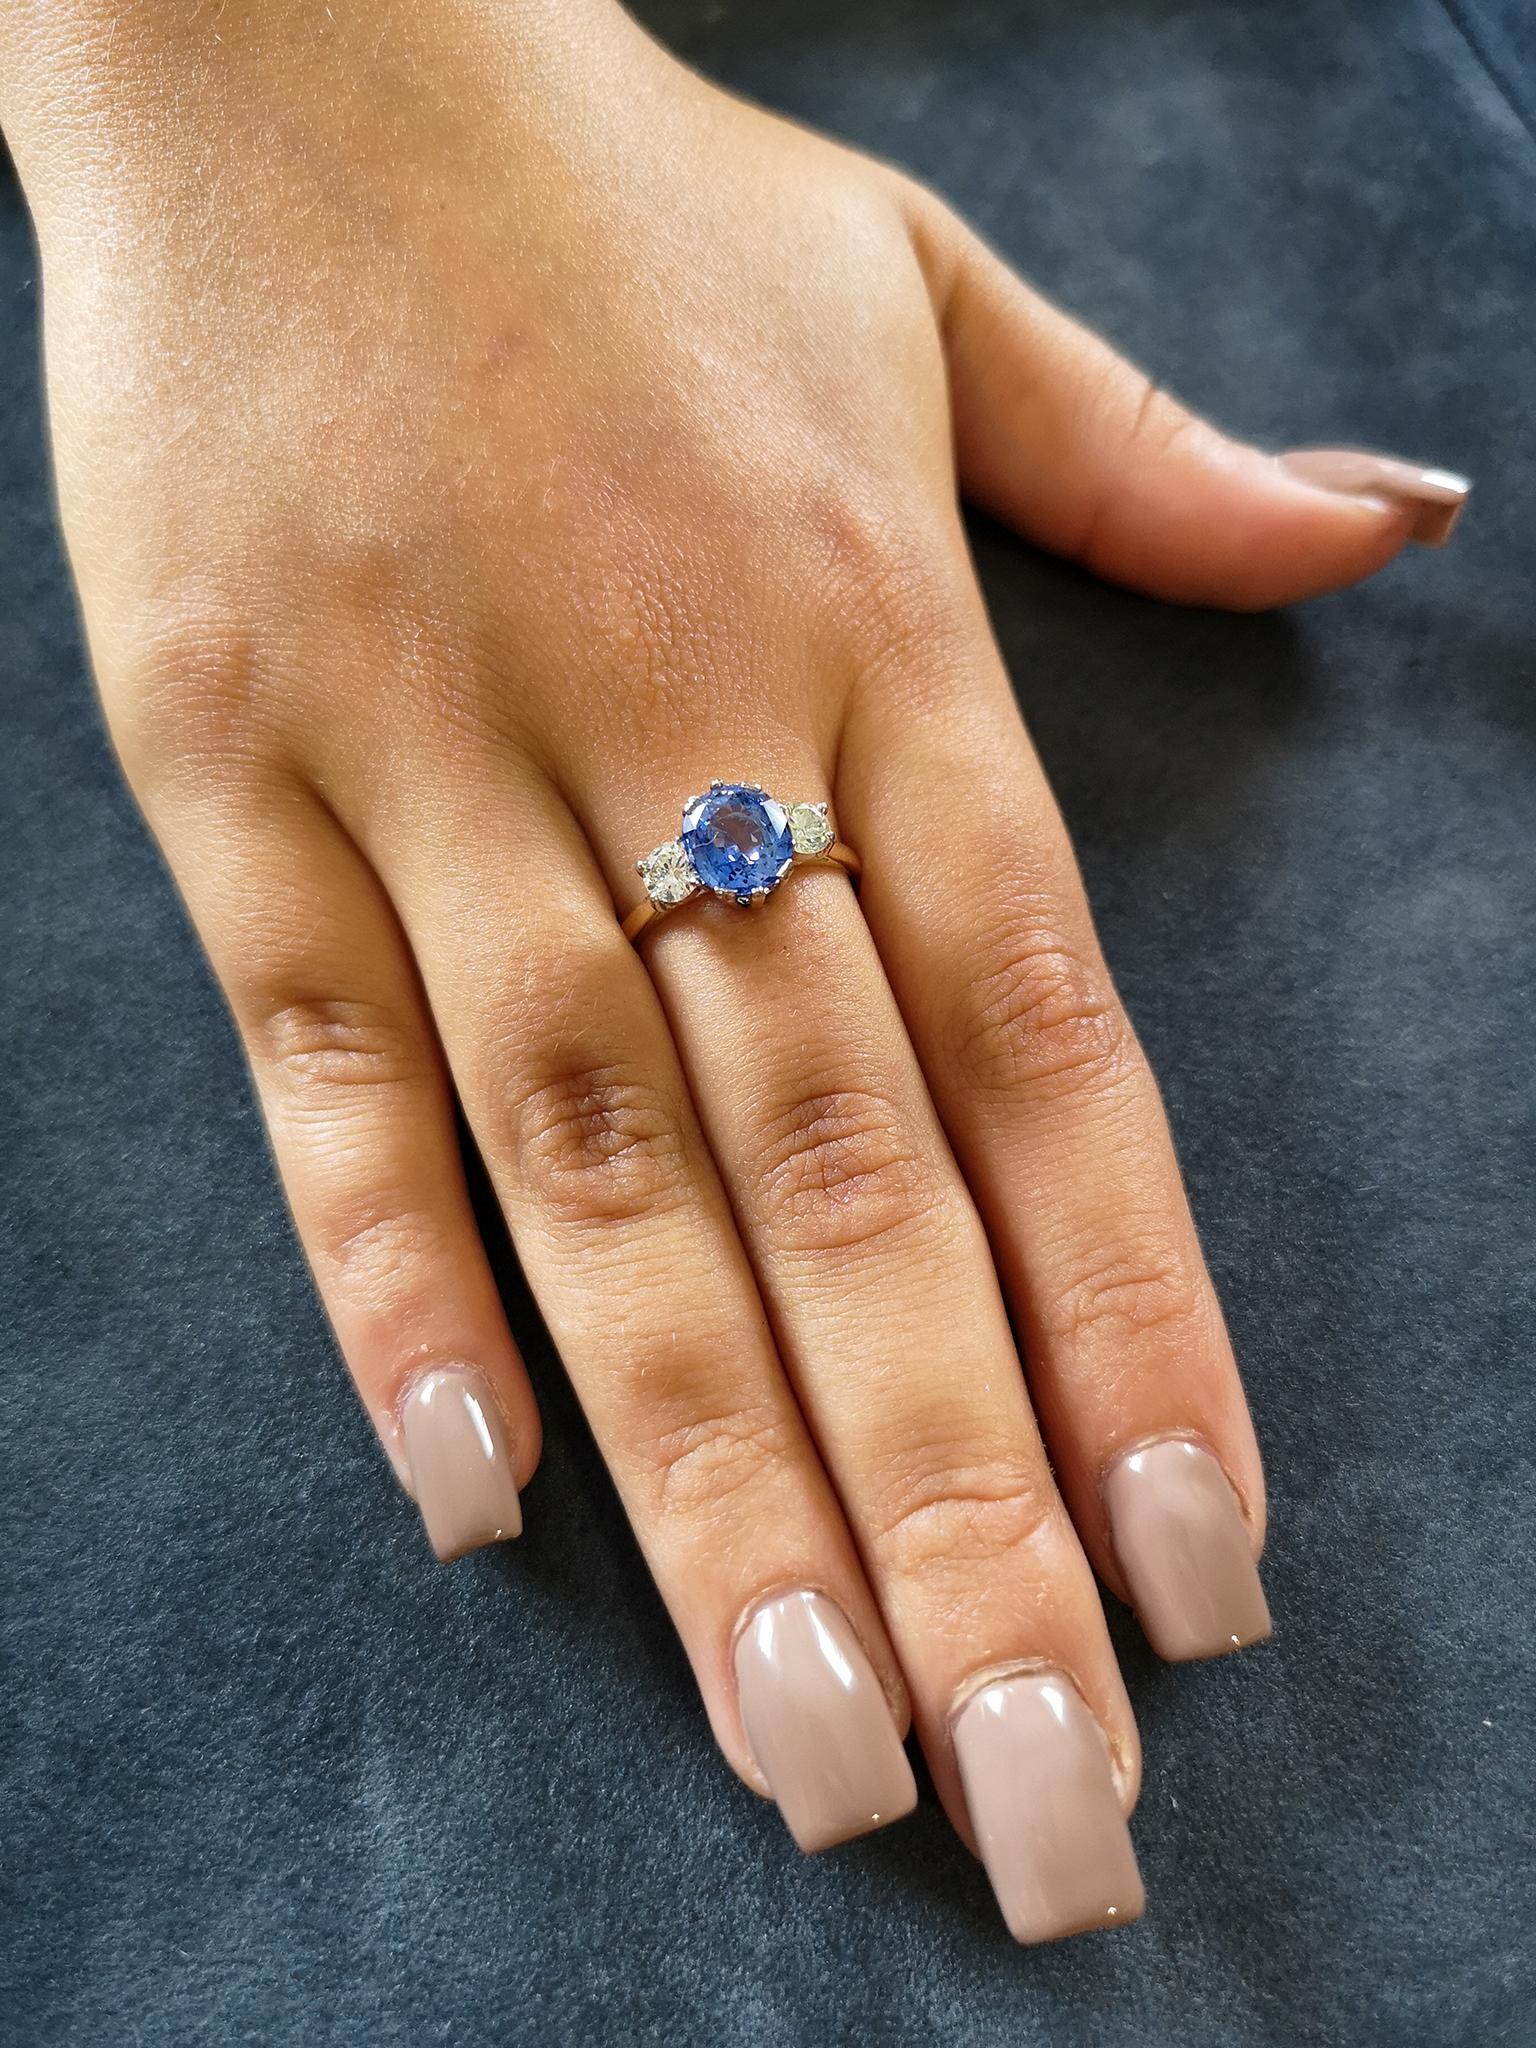 A fine and impressive 'cornflower blue' oval sapphire of approximately 2.00 carats, with exceptional colour and sparkle is mounted in 18-carat white gold double claws. Flanked on each side by a single brilliant-cut diamond, leading to a uniform,